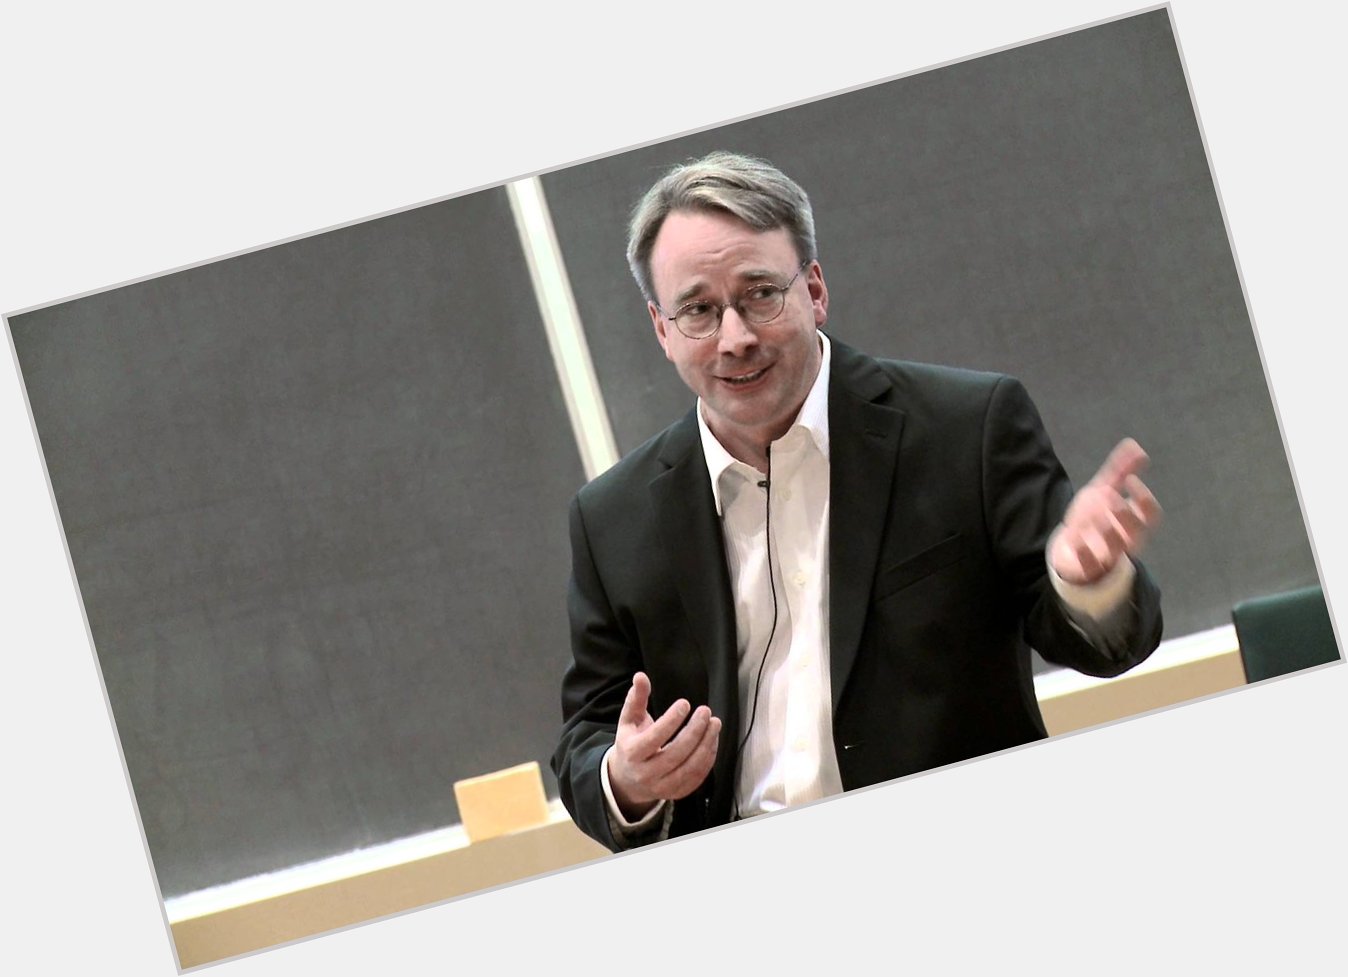 Happy Birthday Linus Torvalds! IoT just not possible without you. 